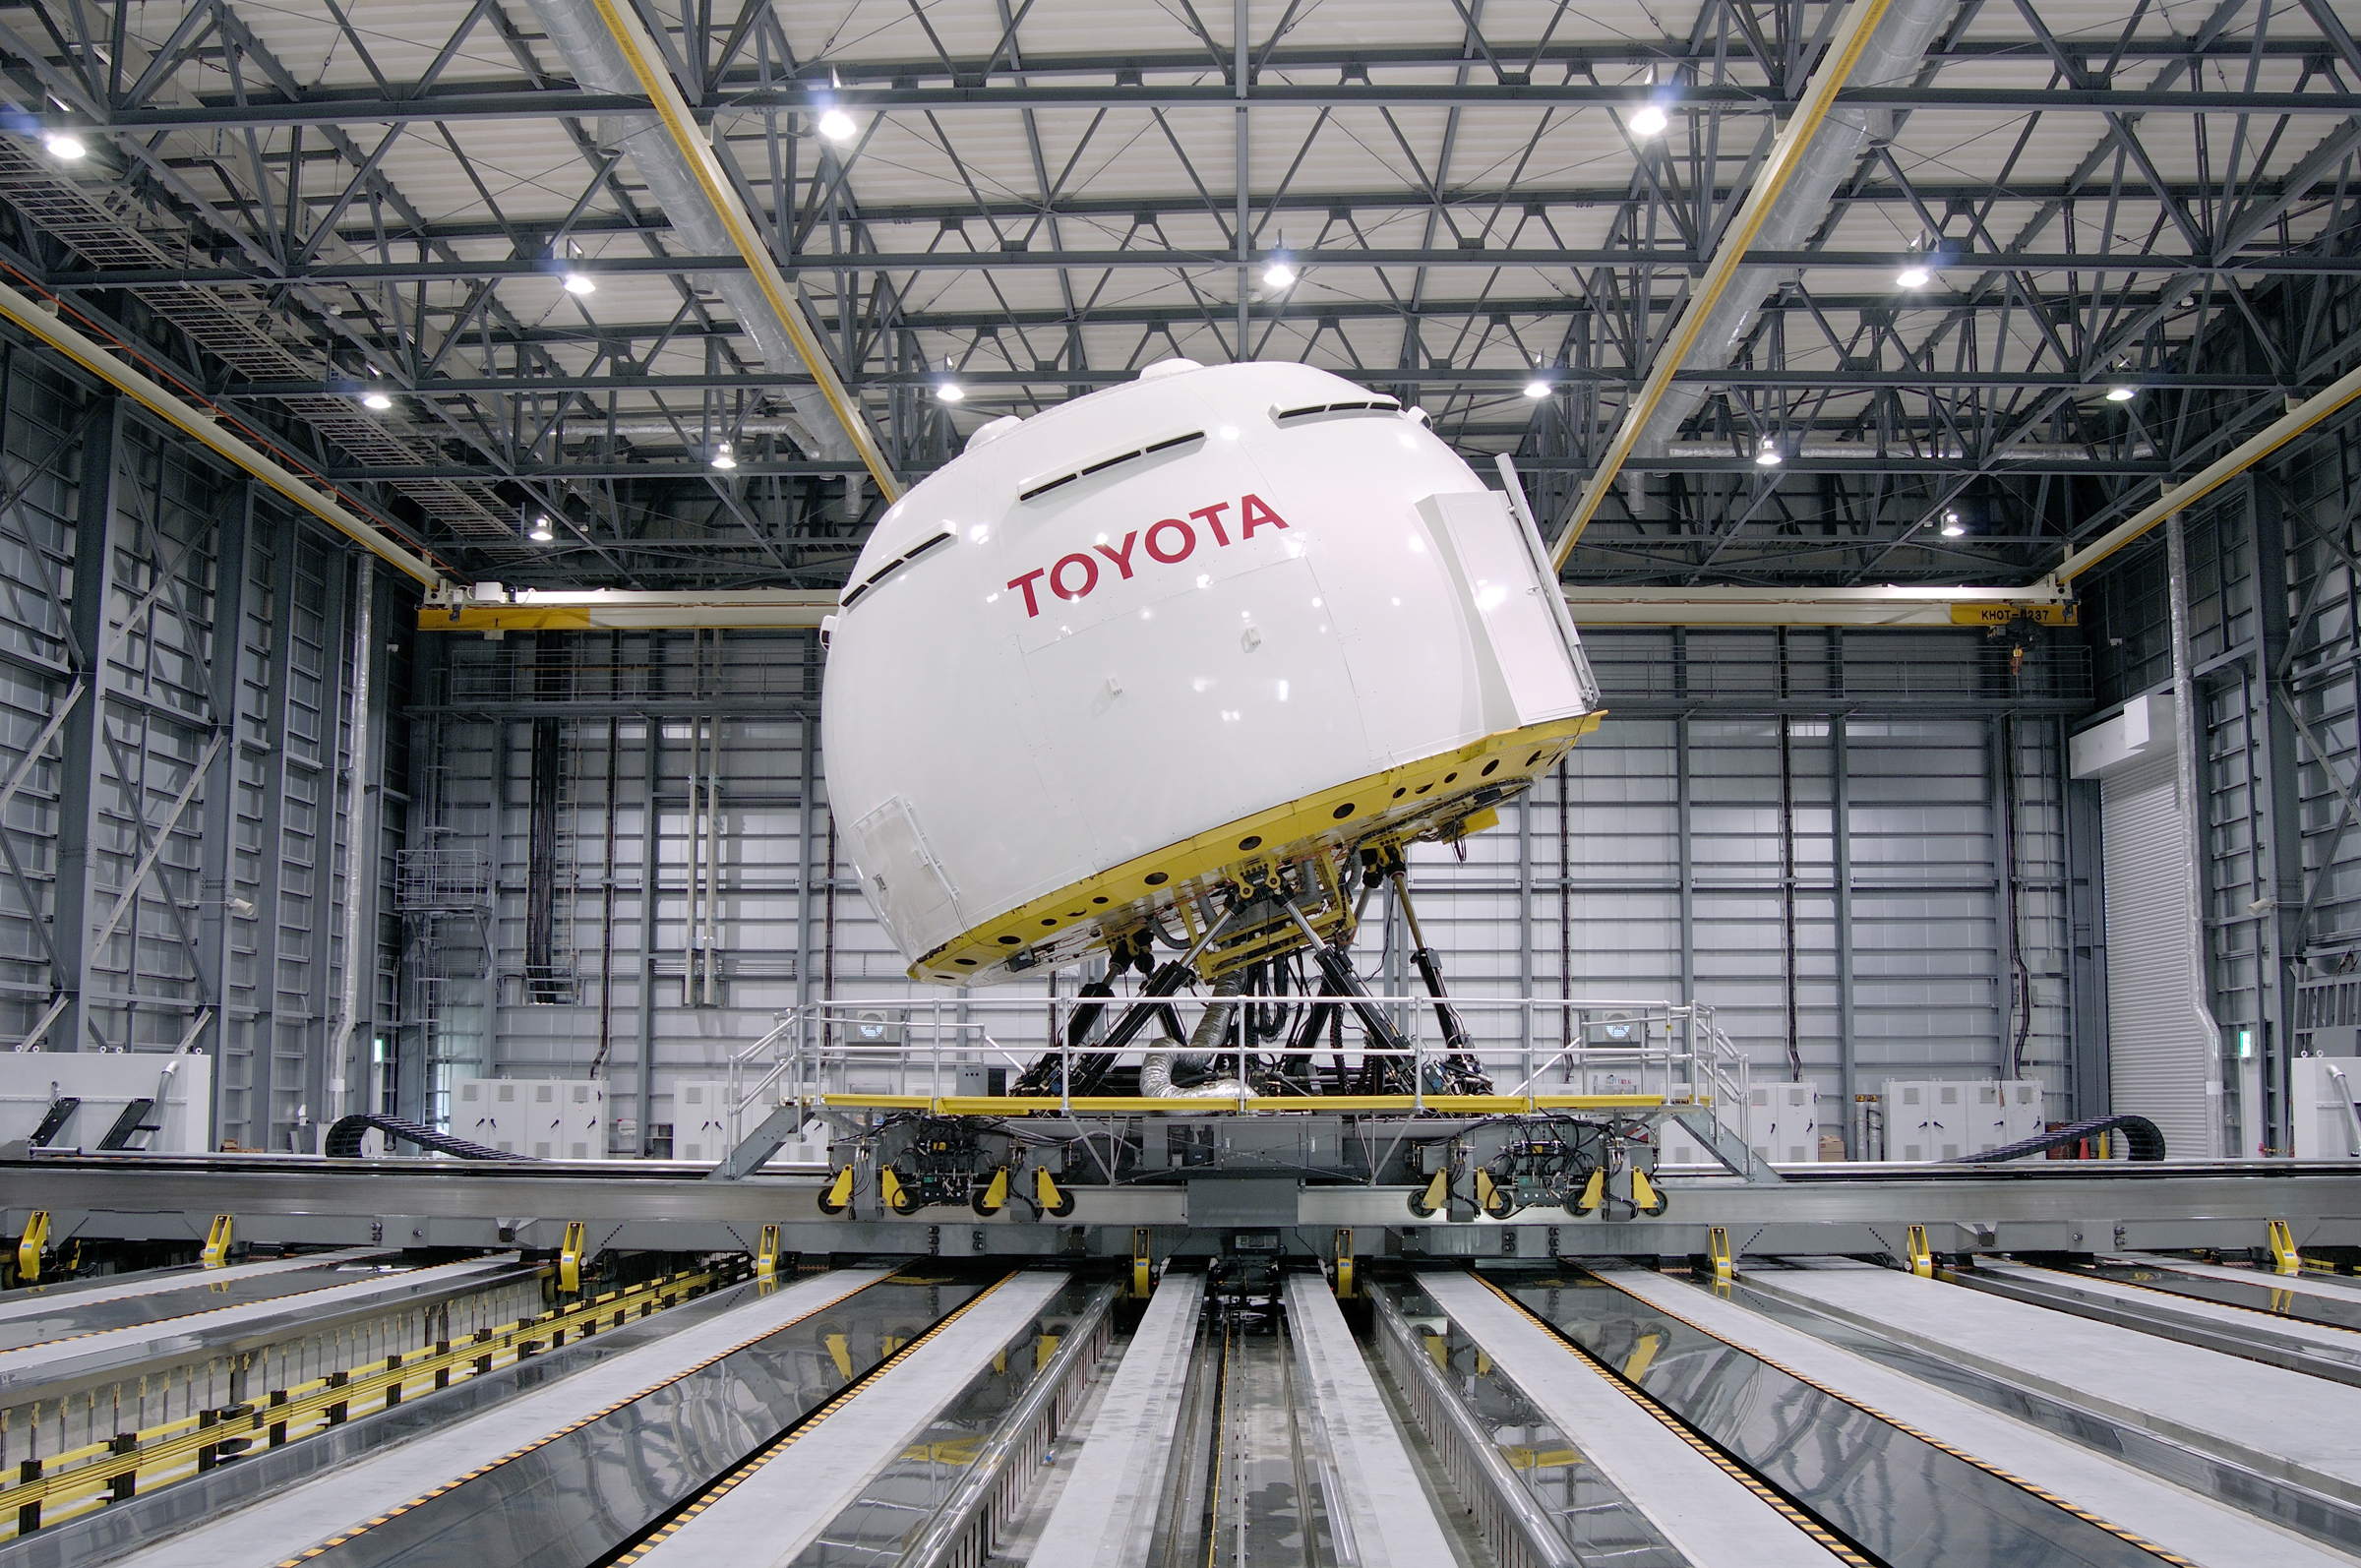 A driving simulator created by Toyota near Mount Fuji in Japan.